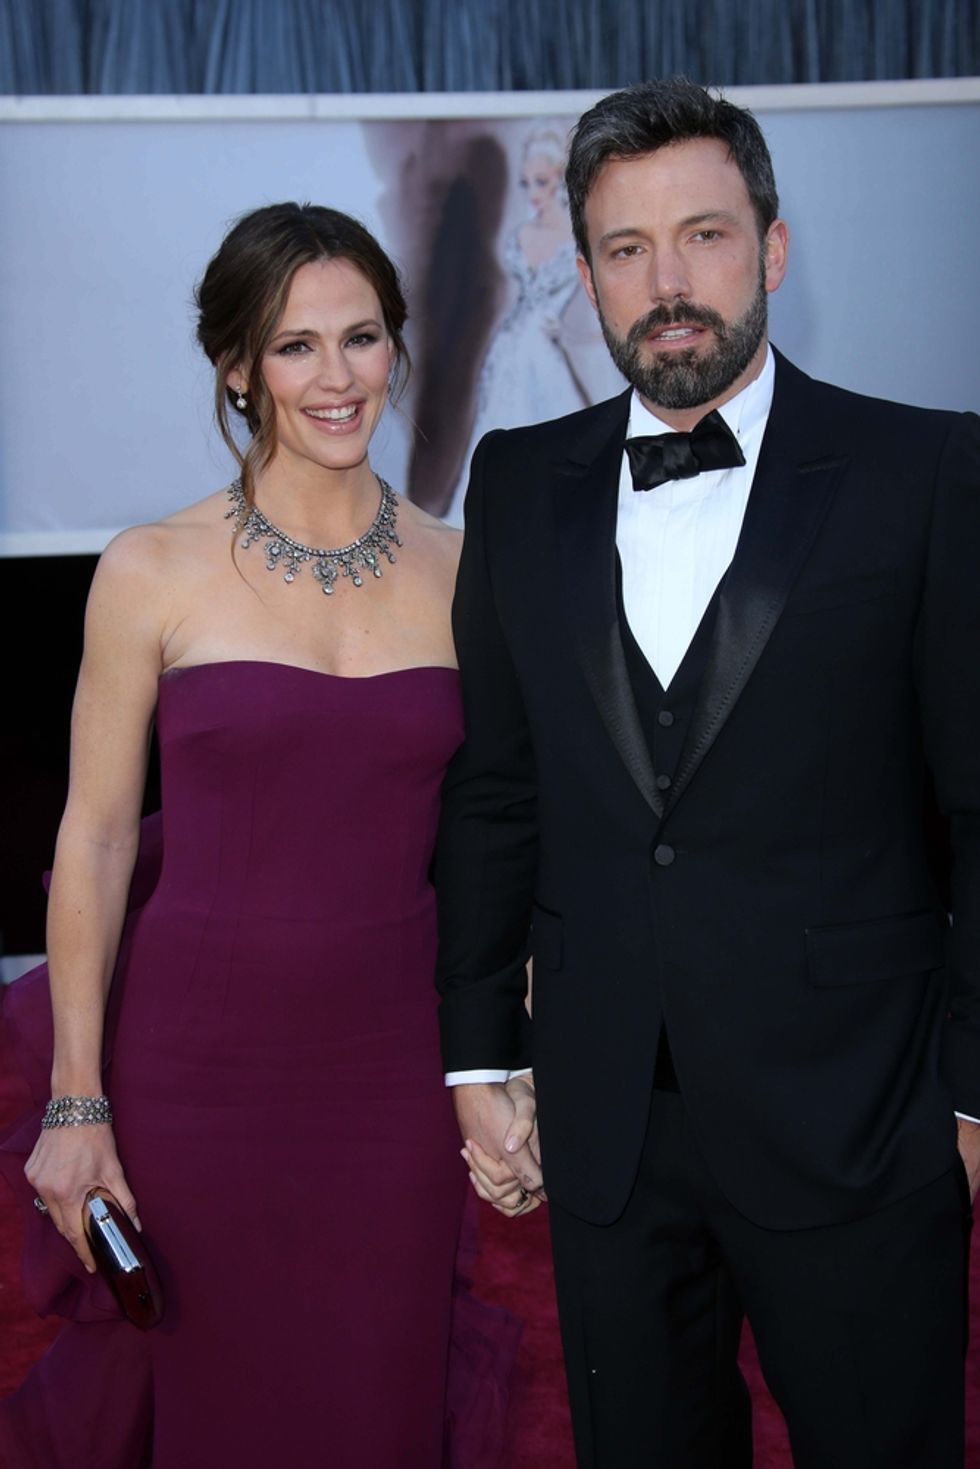 Hollywood Power Couple Ben Affleck and Jennifer Garner Are Splitting Up After 10 Years of Marriage